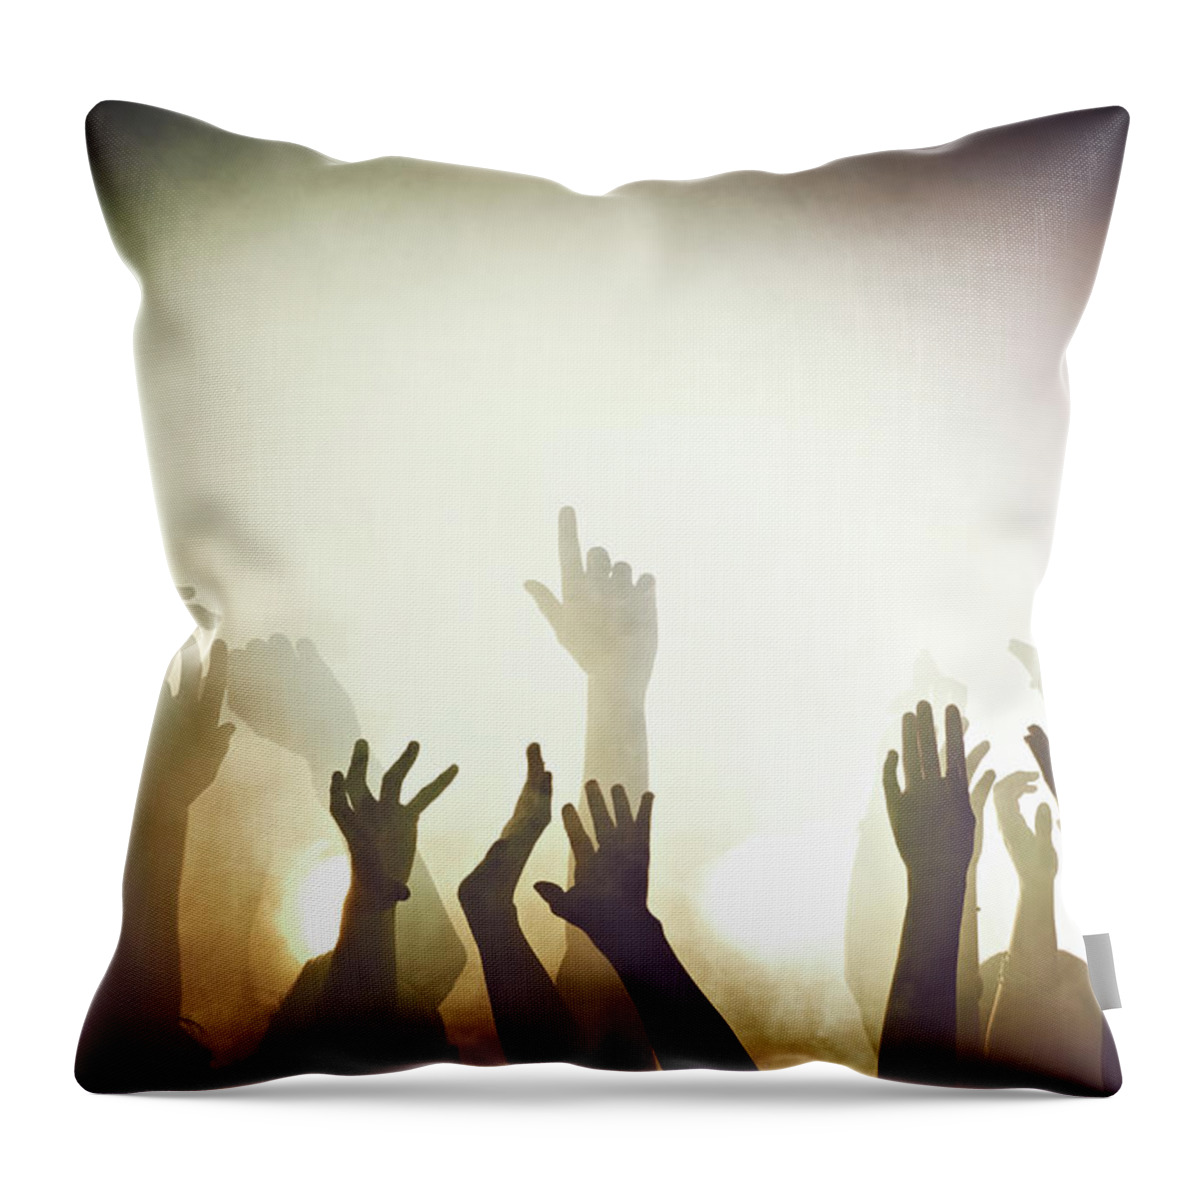 Young Men Throw Pillow featuring the photograph Crowd Of People At Concert Waving Arms by Flashpop